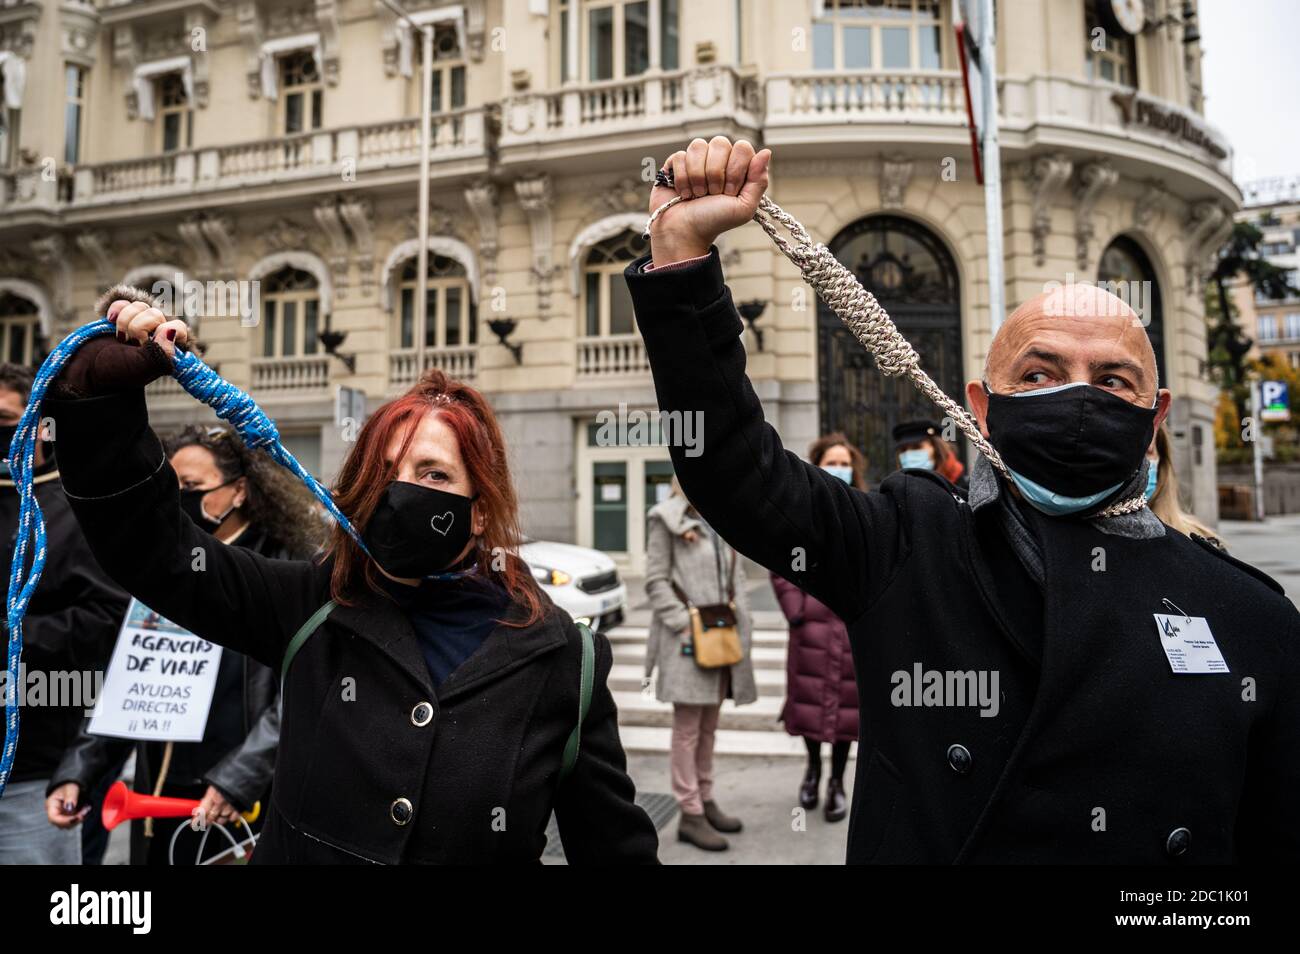 https://c8.alamy.com/comp/2DC1K01/madrid-spain-18th-nov-2020-people-wearing-black-clothes-and-a-rope-around-their-necks-during-a-protest-in-front-of-the-spanish-parliament-to-demand-urgent-aid-for-travel-agencies-and-tour-operators-a-sector-that-has-been-hit-hard-by-the-coronavirus-covid-19-pandemic-as-tourism-is-closed-credit-marcos-del-mazoalamy-live-news-2DC1K01.jpg